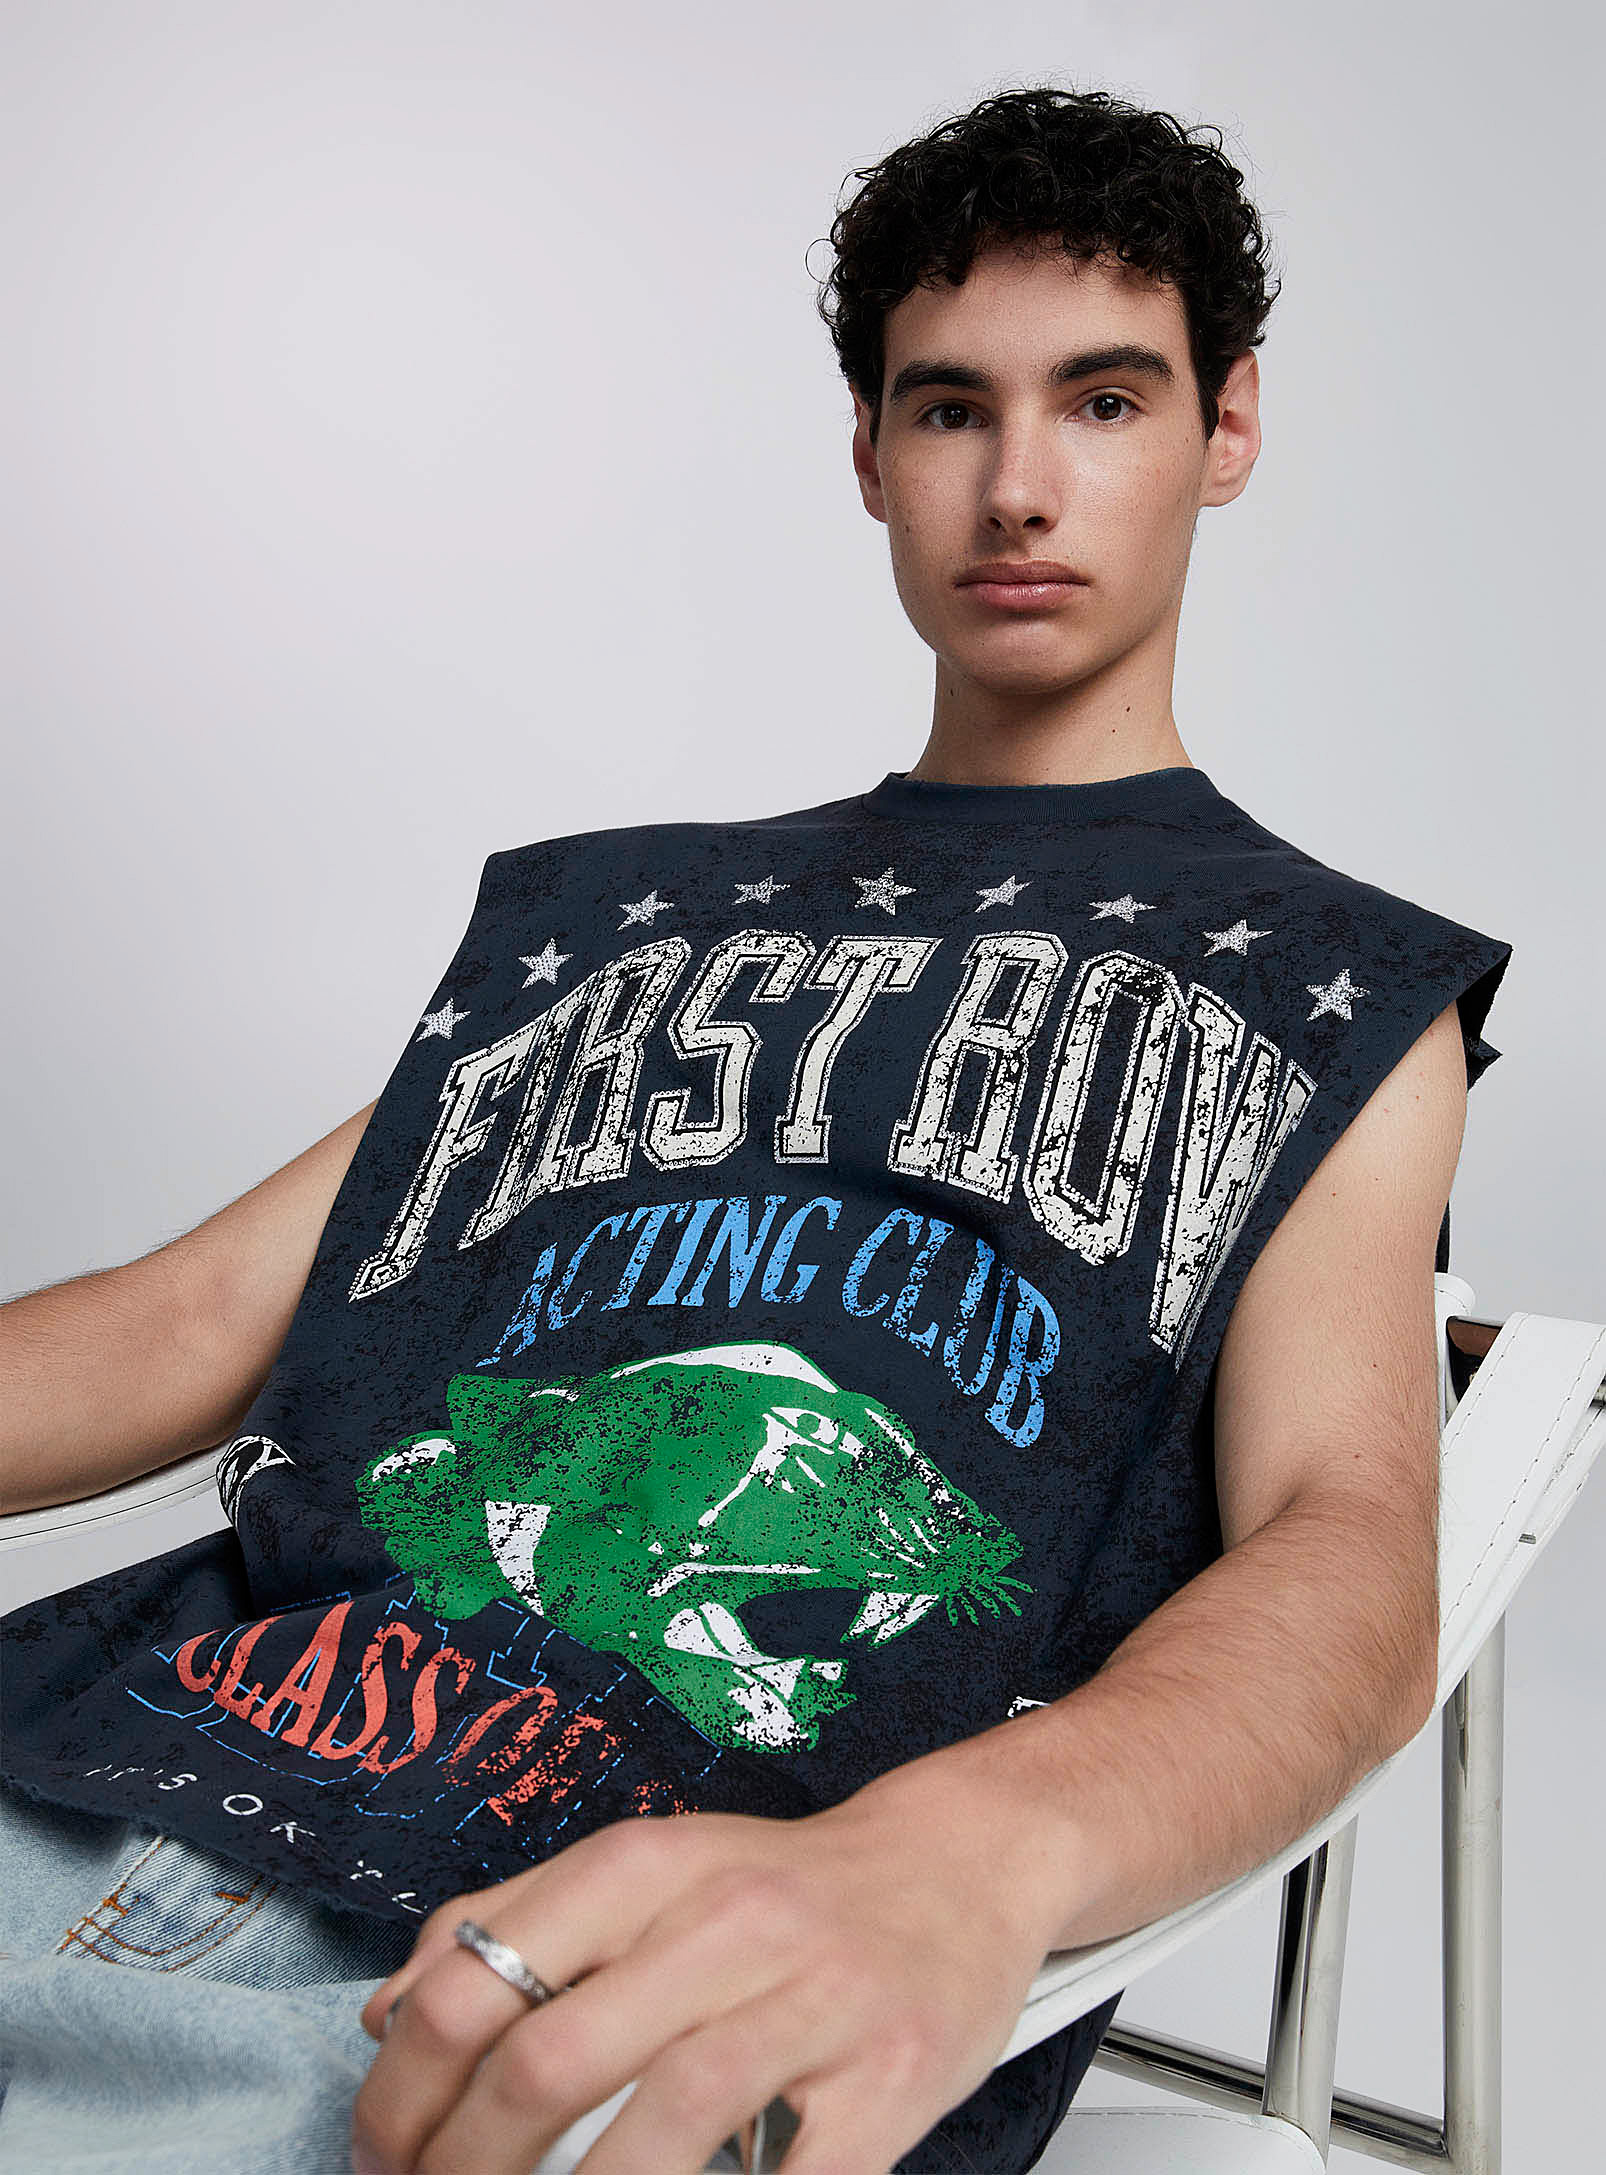 First Row - Men's Acting Club muscle top